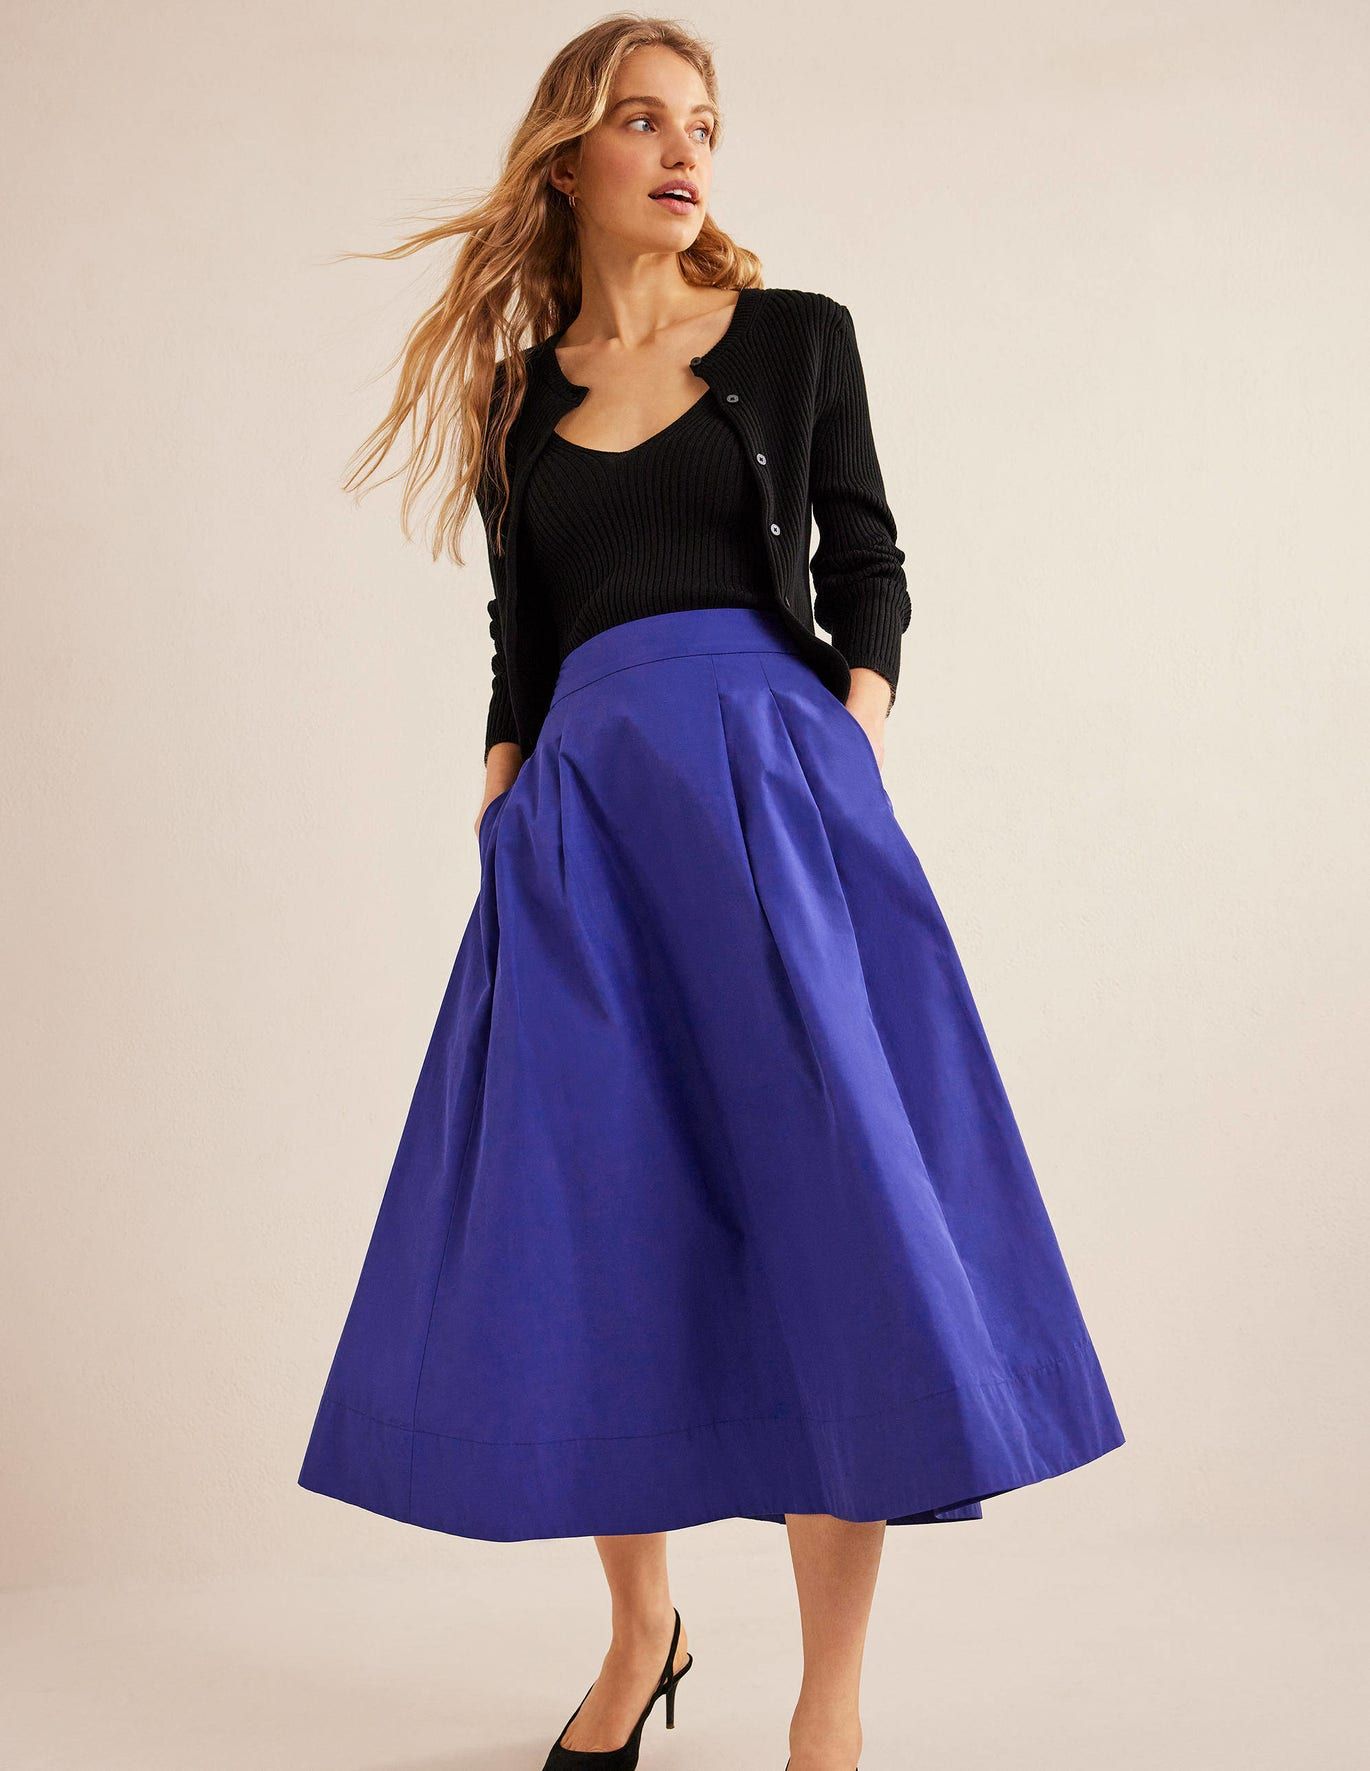 30 Pretty Midi Skirts Seen All Over New York Fashion Week | Who What Wear